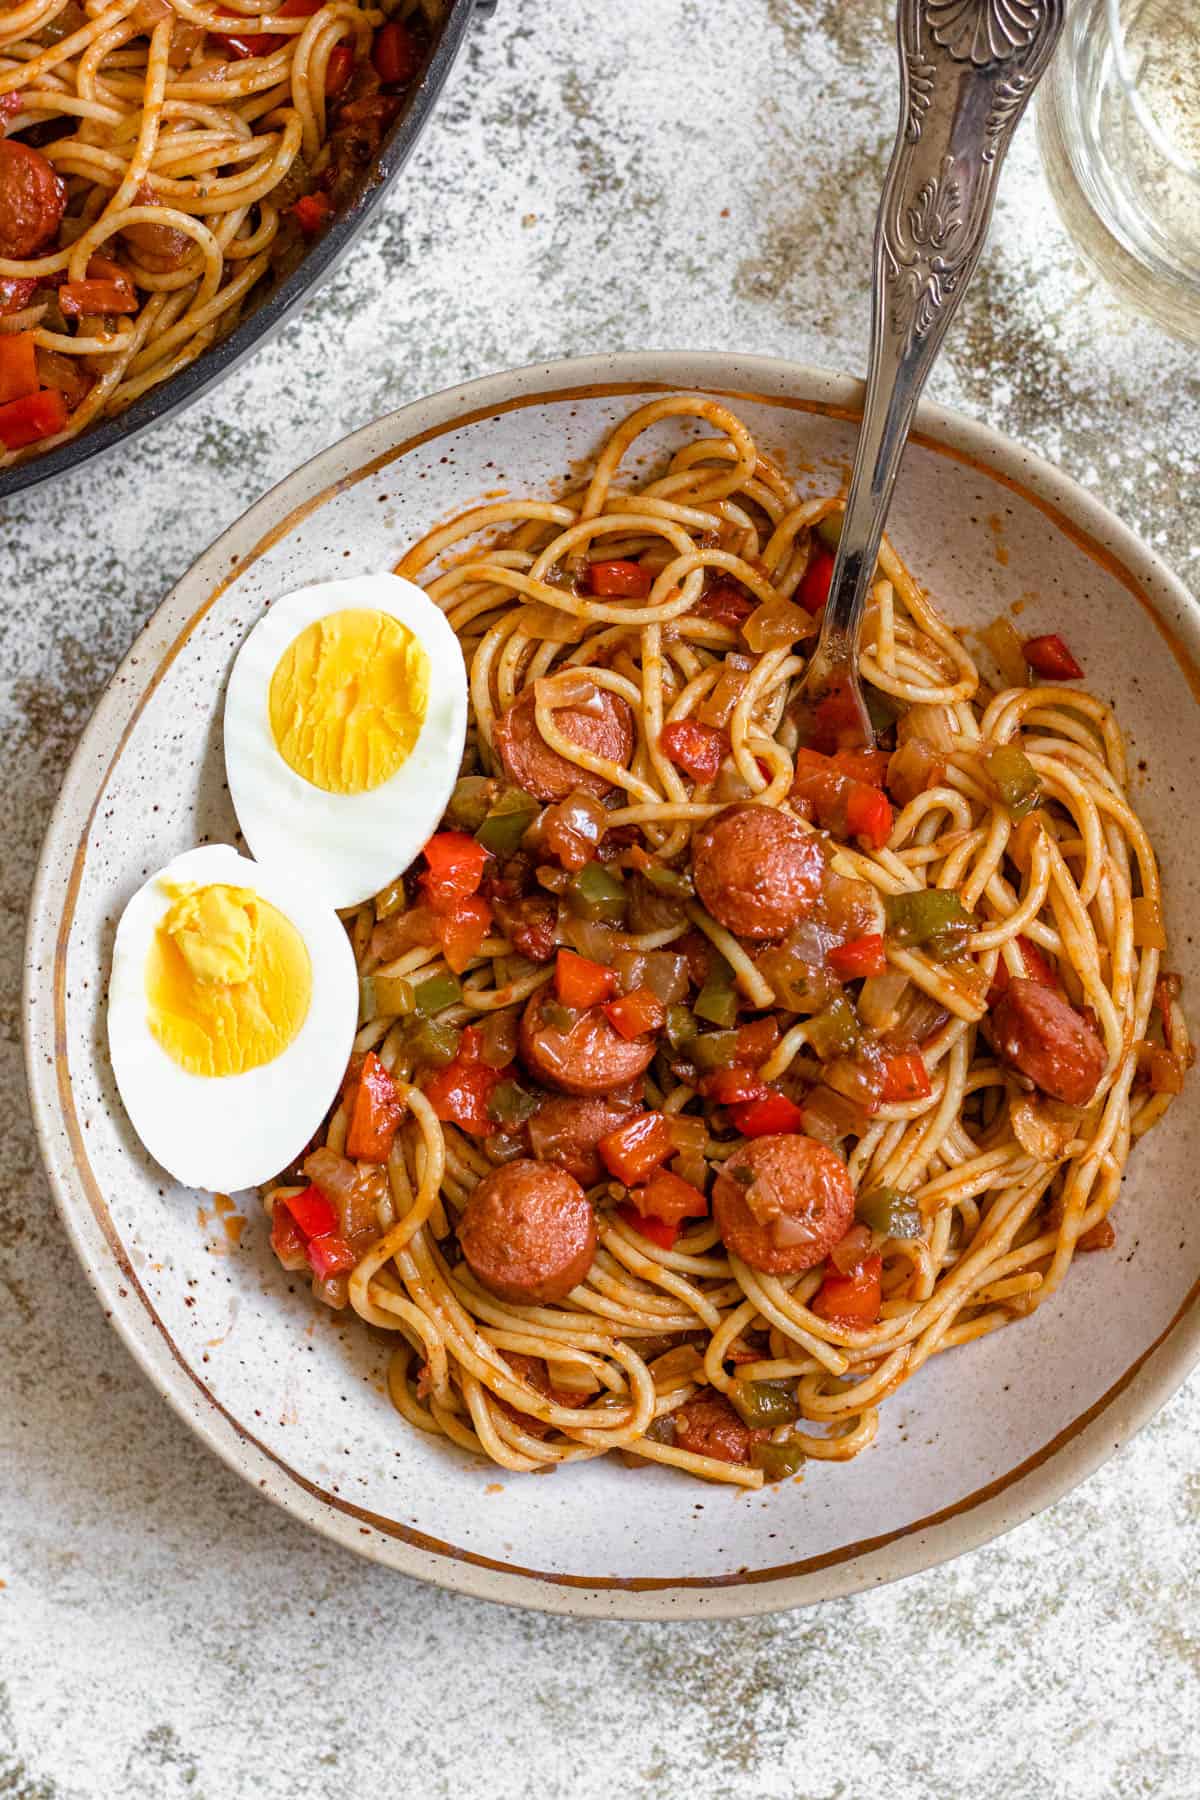 Plate of Haitian Spaghetti with a boiled egg cut in half garnished on the side. 